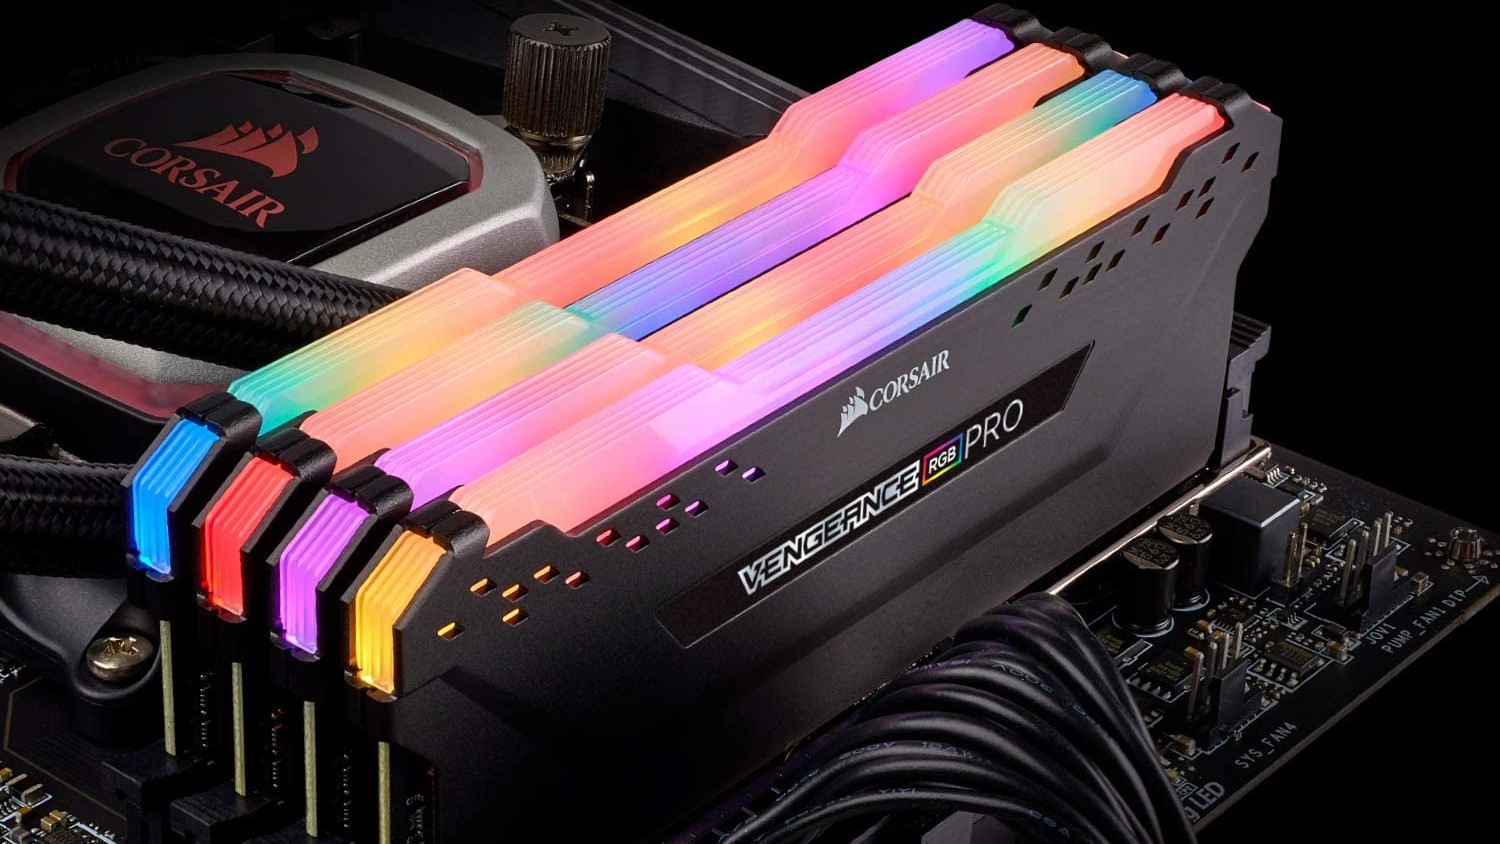 RAM Speed Matters: How Your PC's RAM Affects Performance?